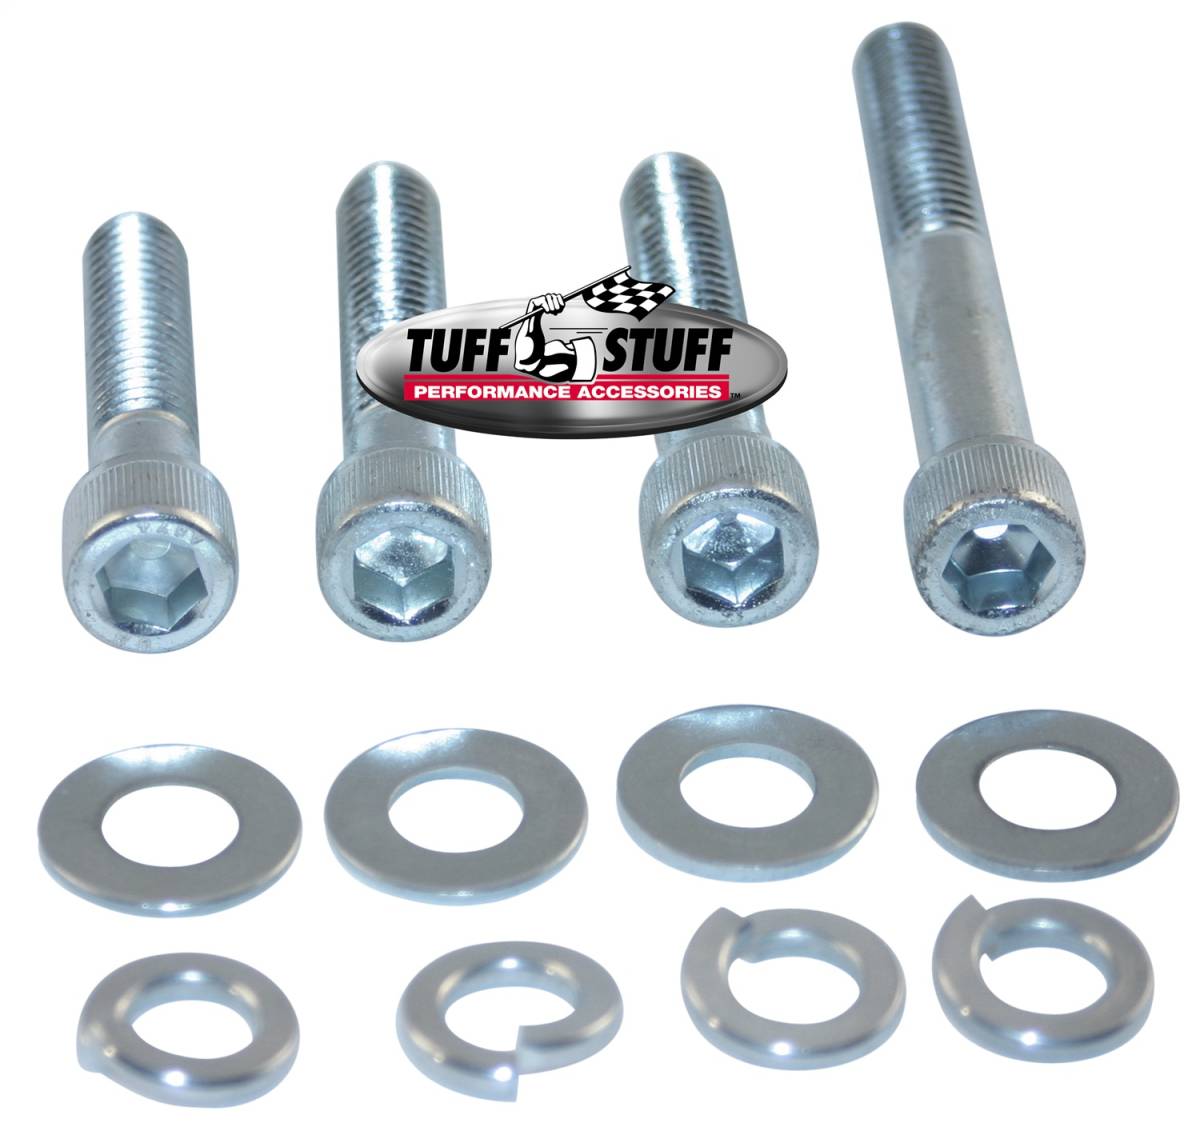 Tuff Stuff Performance - Water Pump Bolt Kit Chrome Socket Incl. (1)3/8in. -16x1 3/4/(2)3/8in.-16x2 in./(1)3/8 in-16x2 3/4in. Bolts/(4) Lock And (4) Flat Washers 7675C